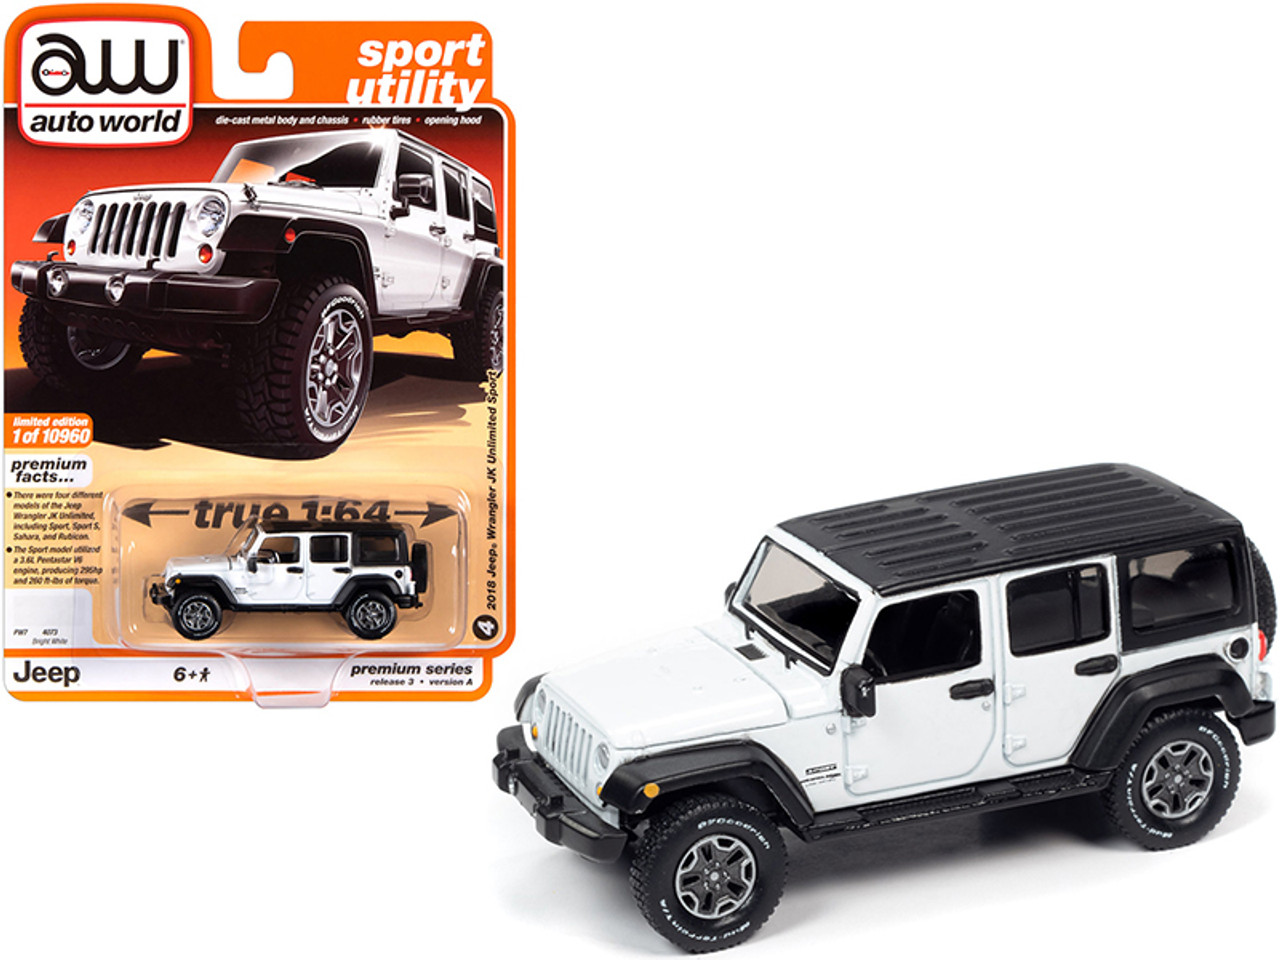 2018 Jeep Wrangler JK Unlimited Sport (4-Door) Bright White with Black Top "Sport Utility" Limited Edition to 10960 pieces Worldwide 1/64 Diecast Model Car by Autoworld